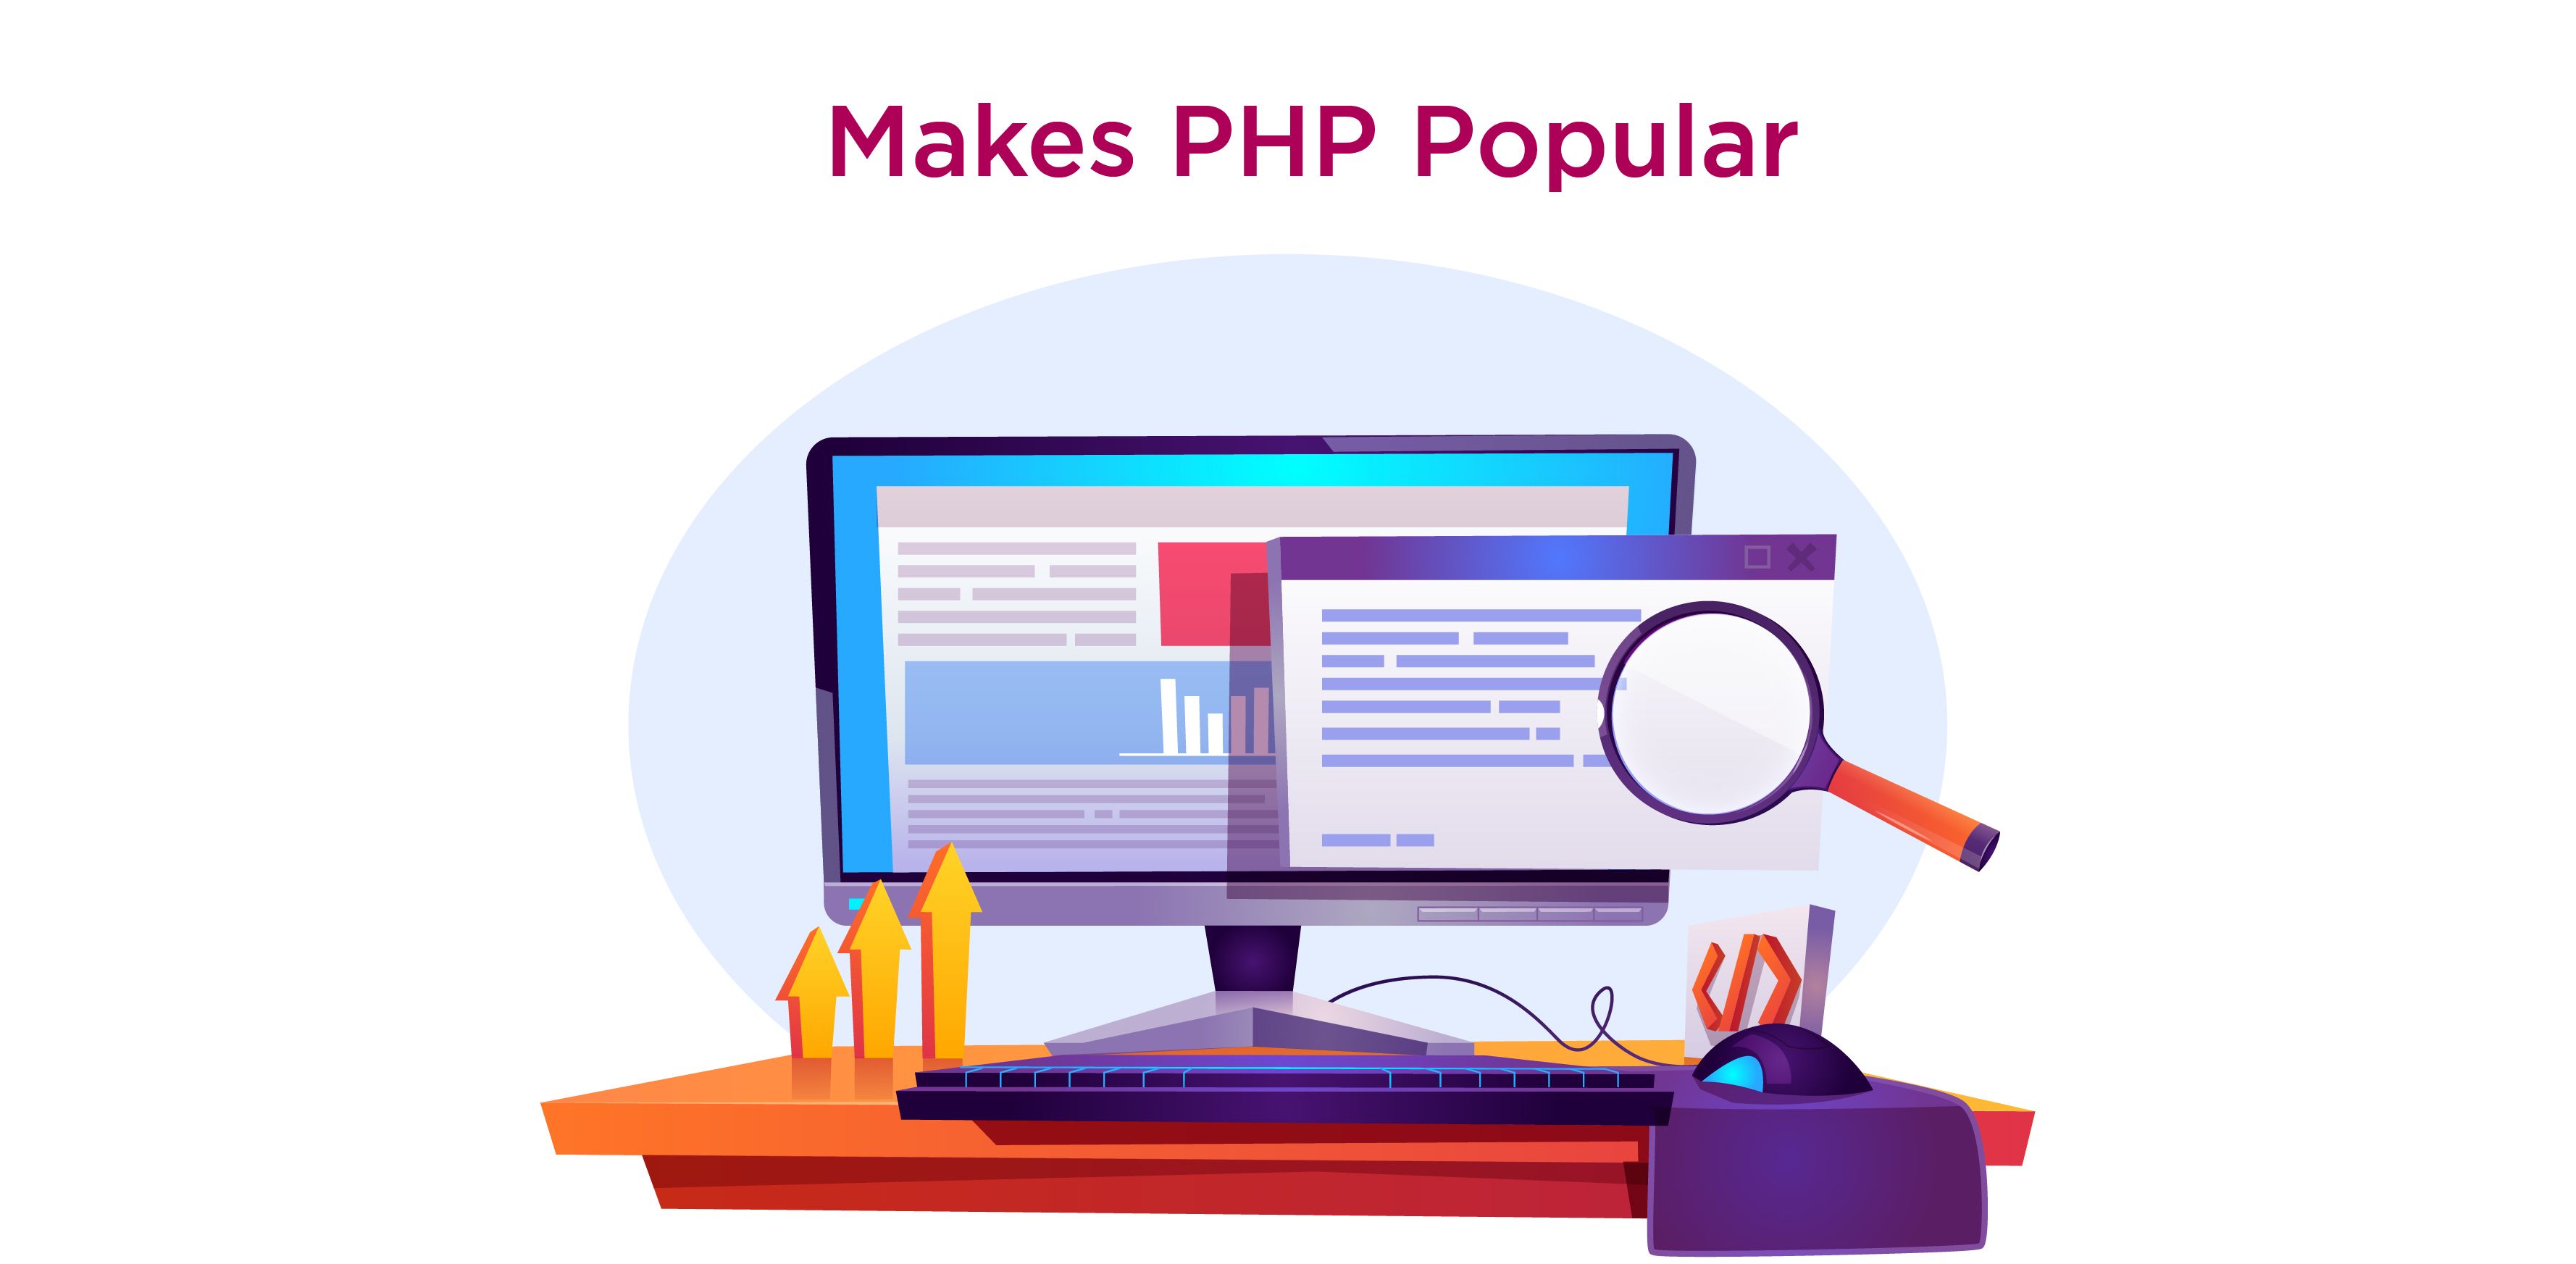 What makes PHP Popular?